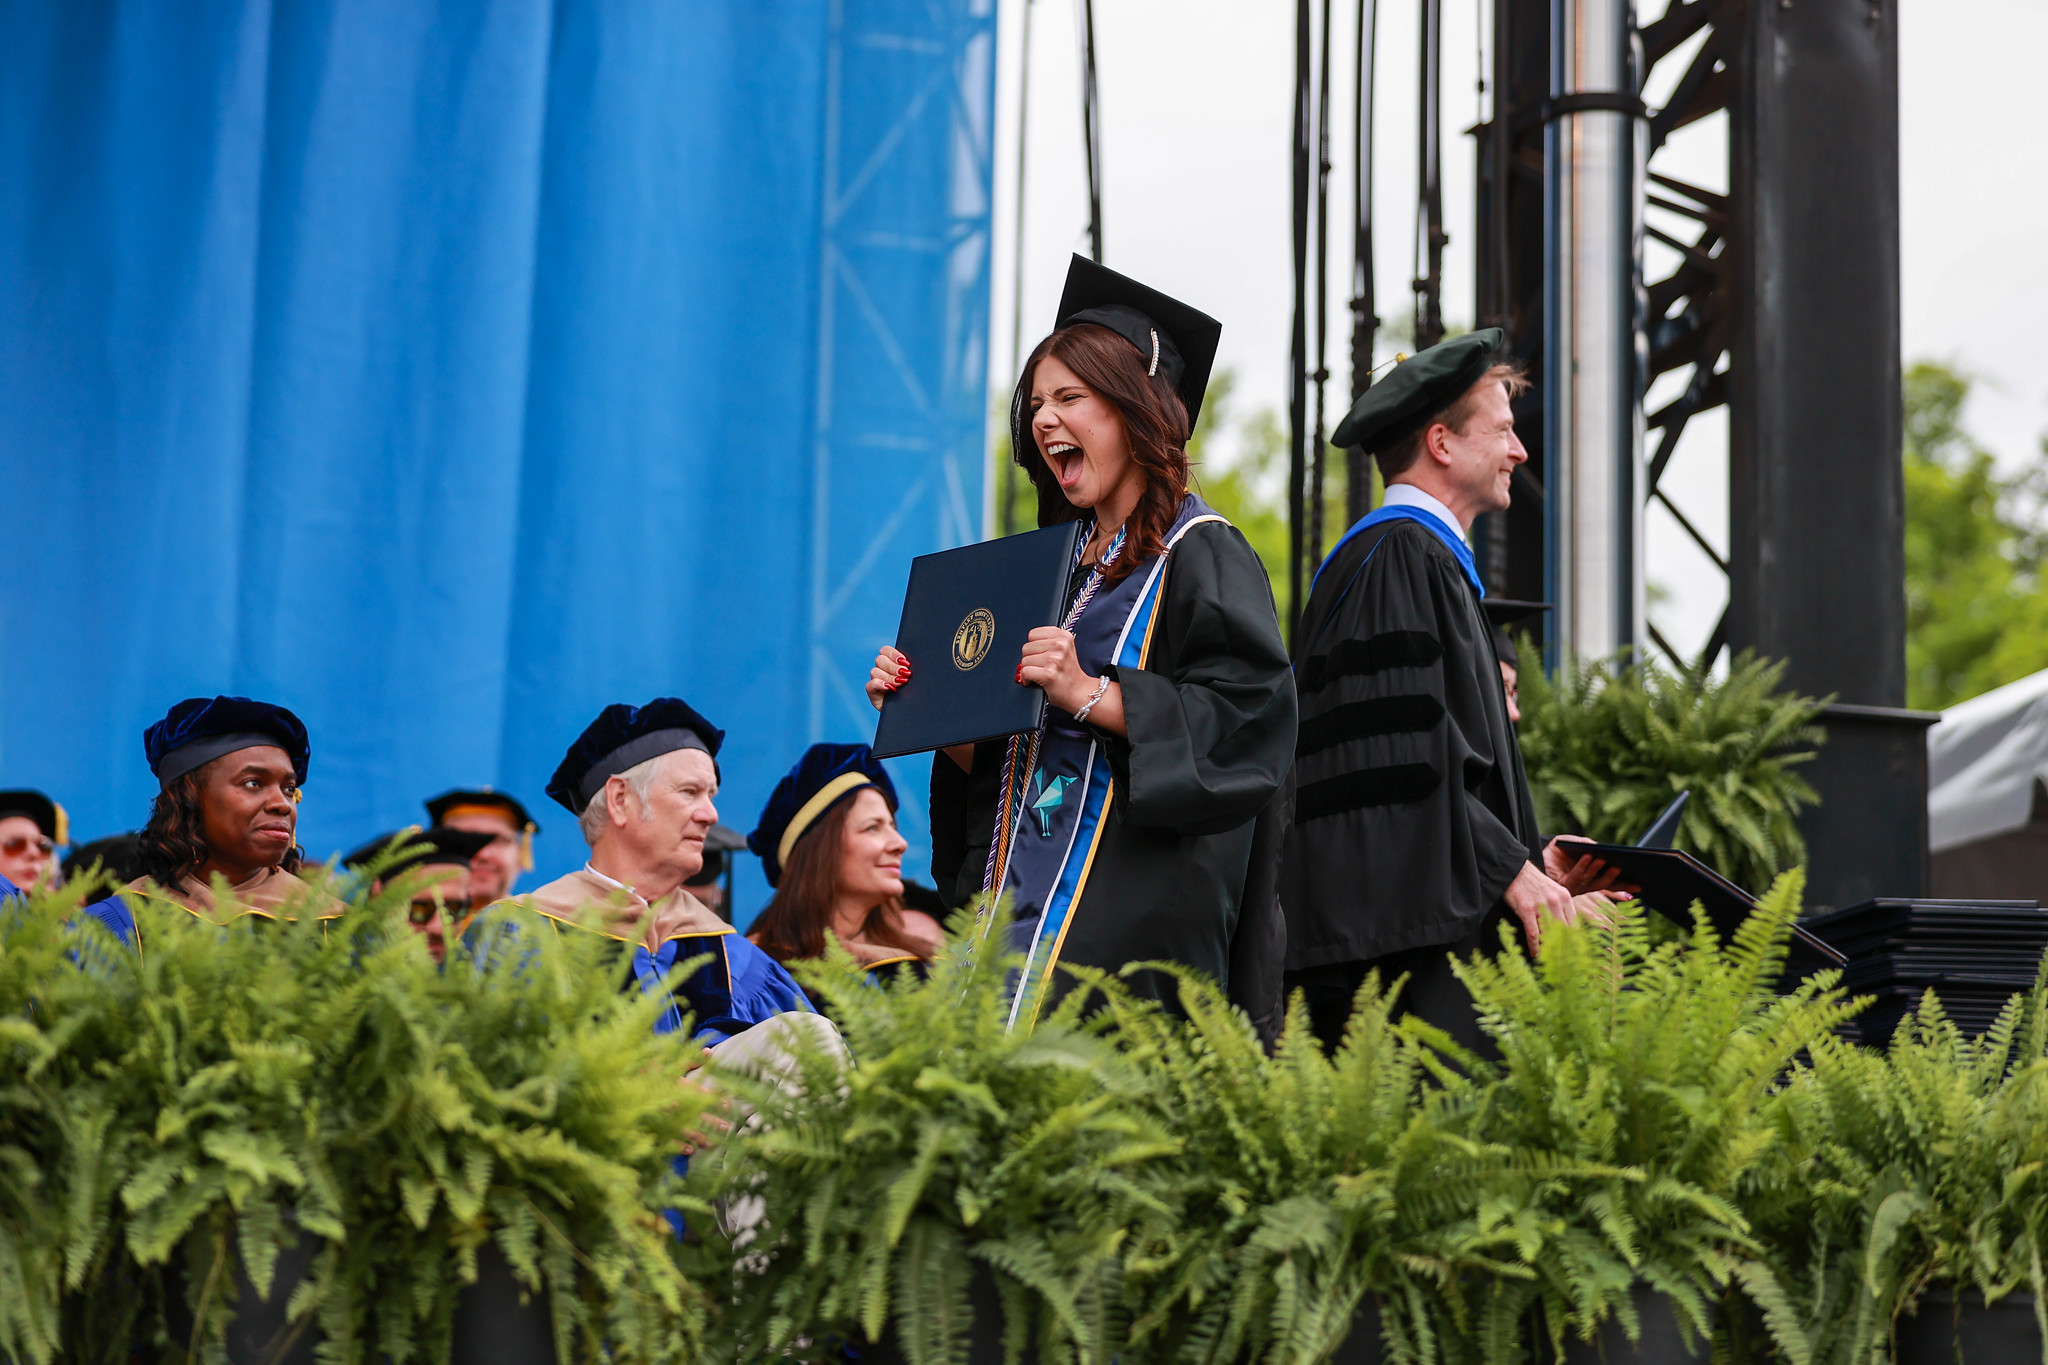 A graduate exclaims on stage after receiving her diploma